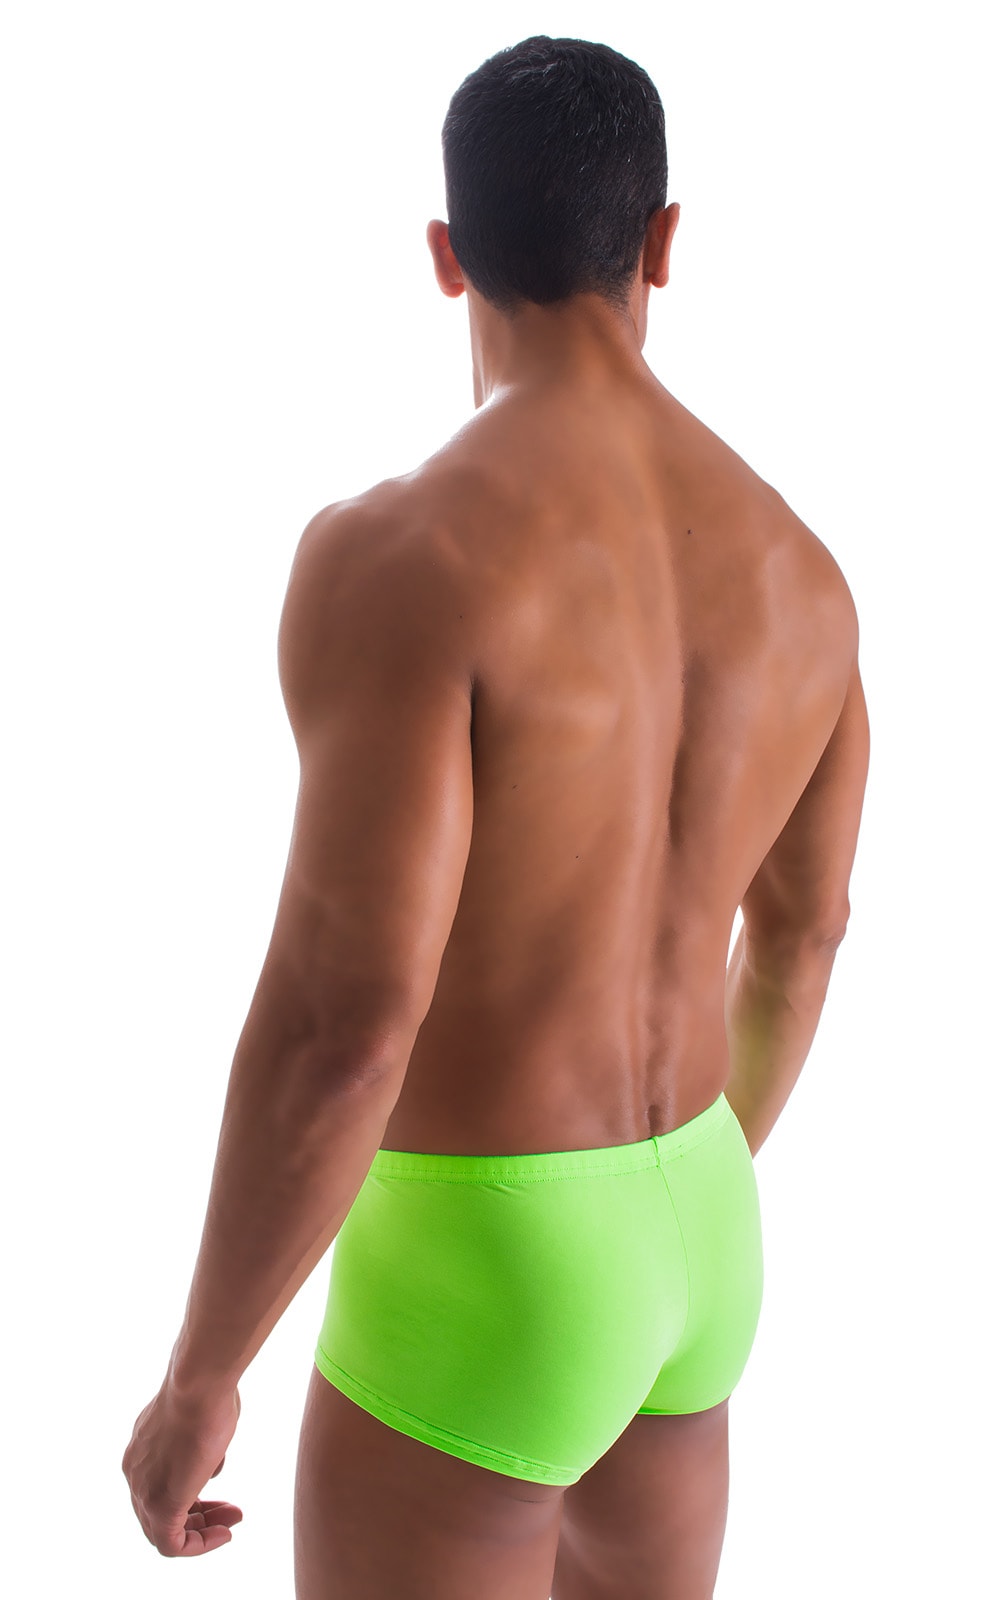 Fitted Pouch - Boxer - Swim Trunks in ThinSKINZ Neon Lime, Rear View